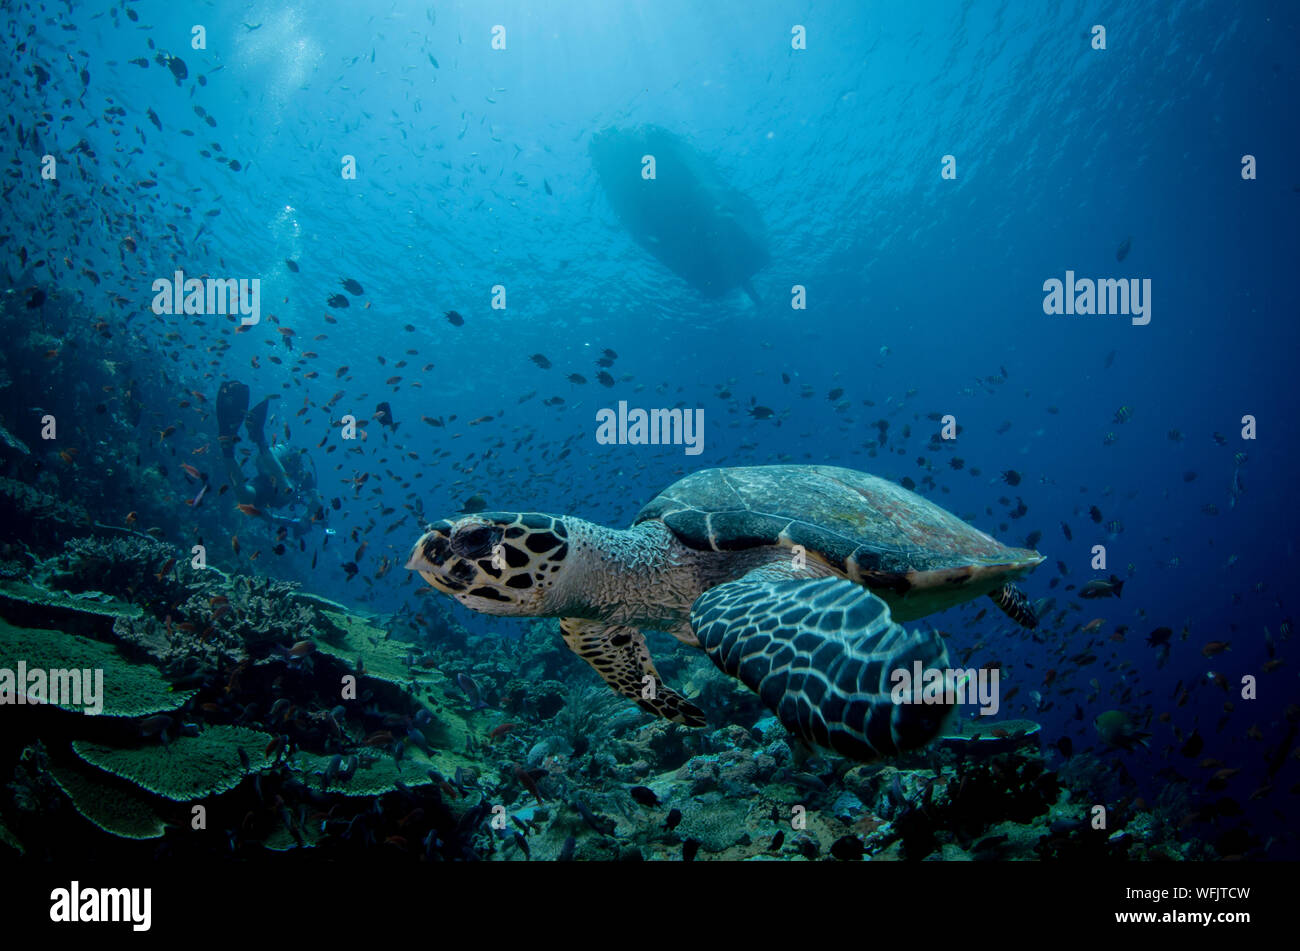 3dRose LSP_172910_1 Sea Turtle Swims Through The Ocean with Tropic Fishes Corals and More Toggle Switch 